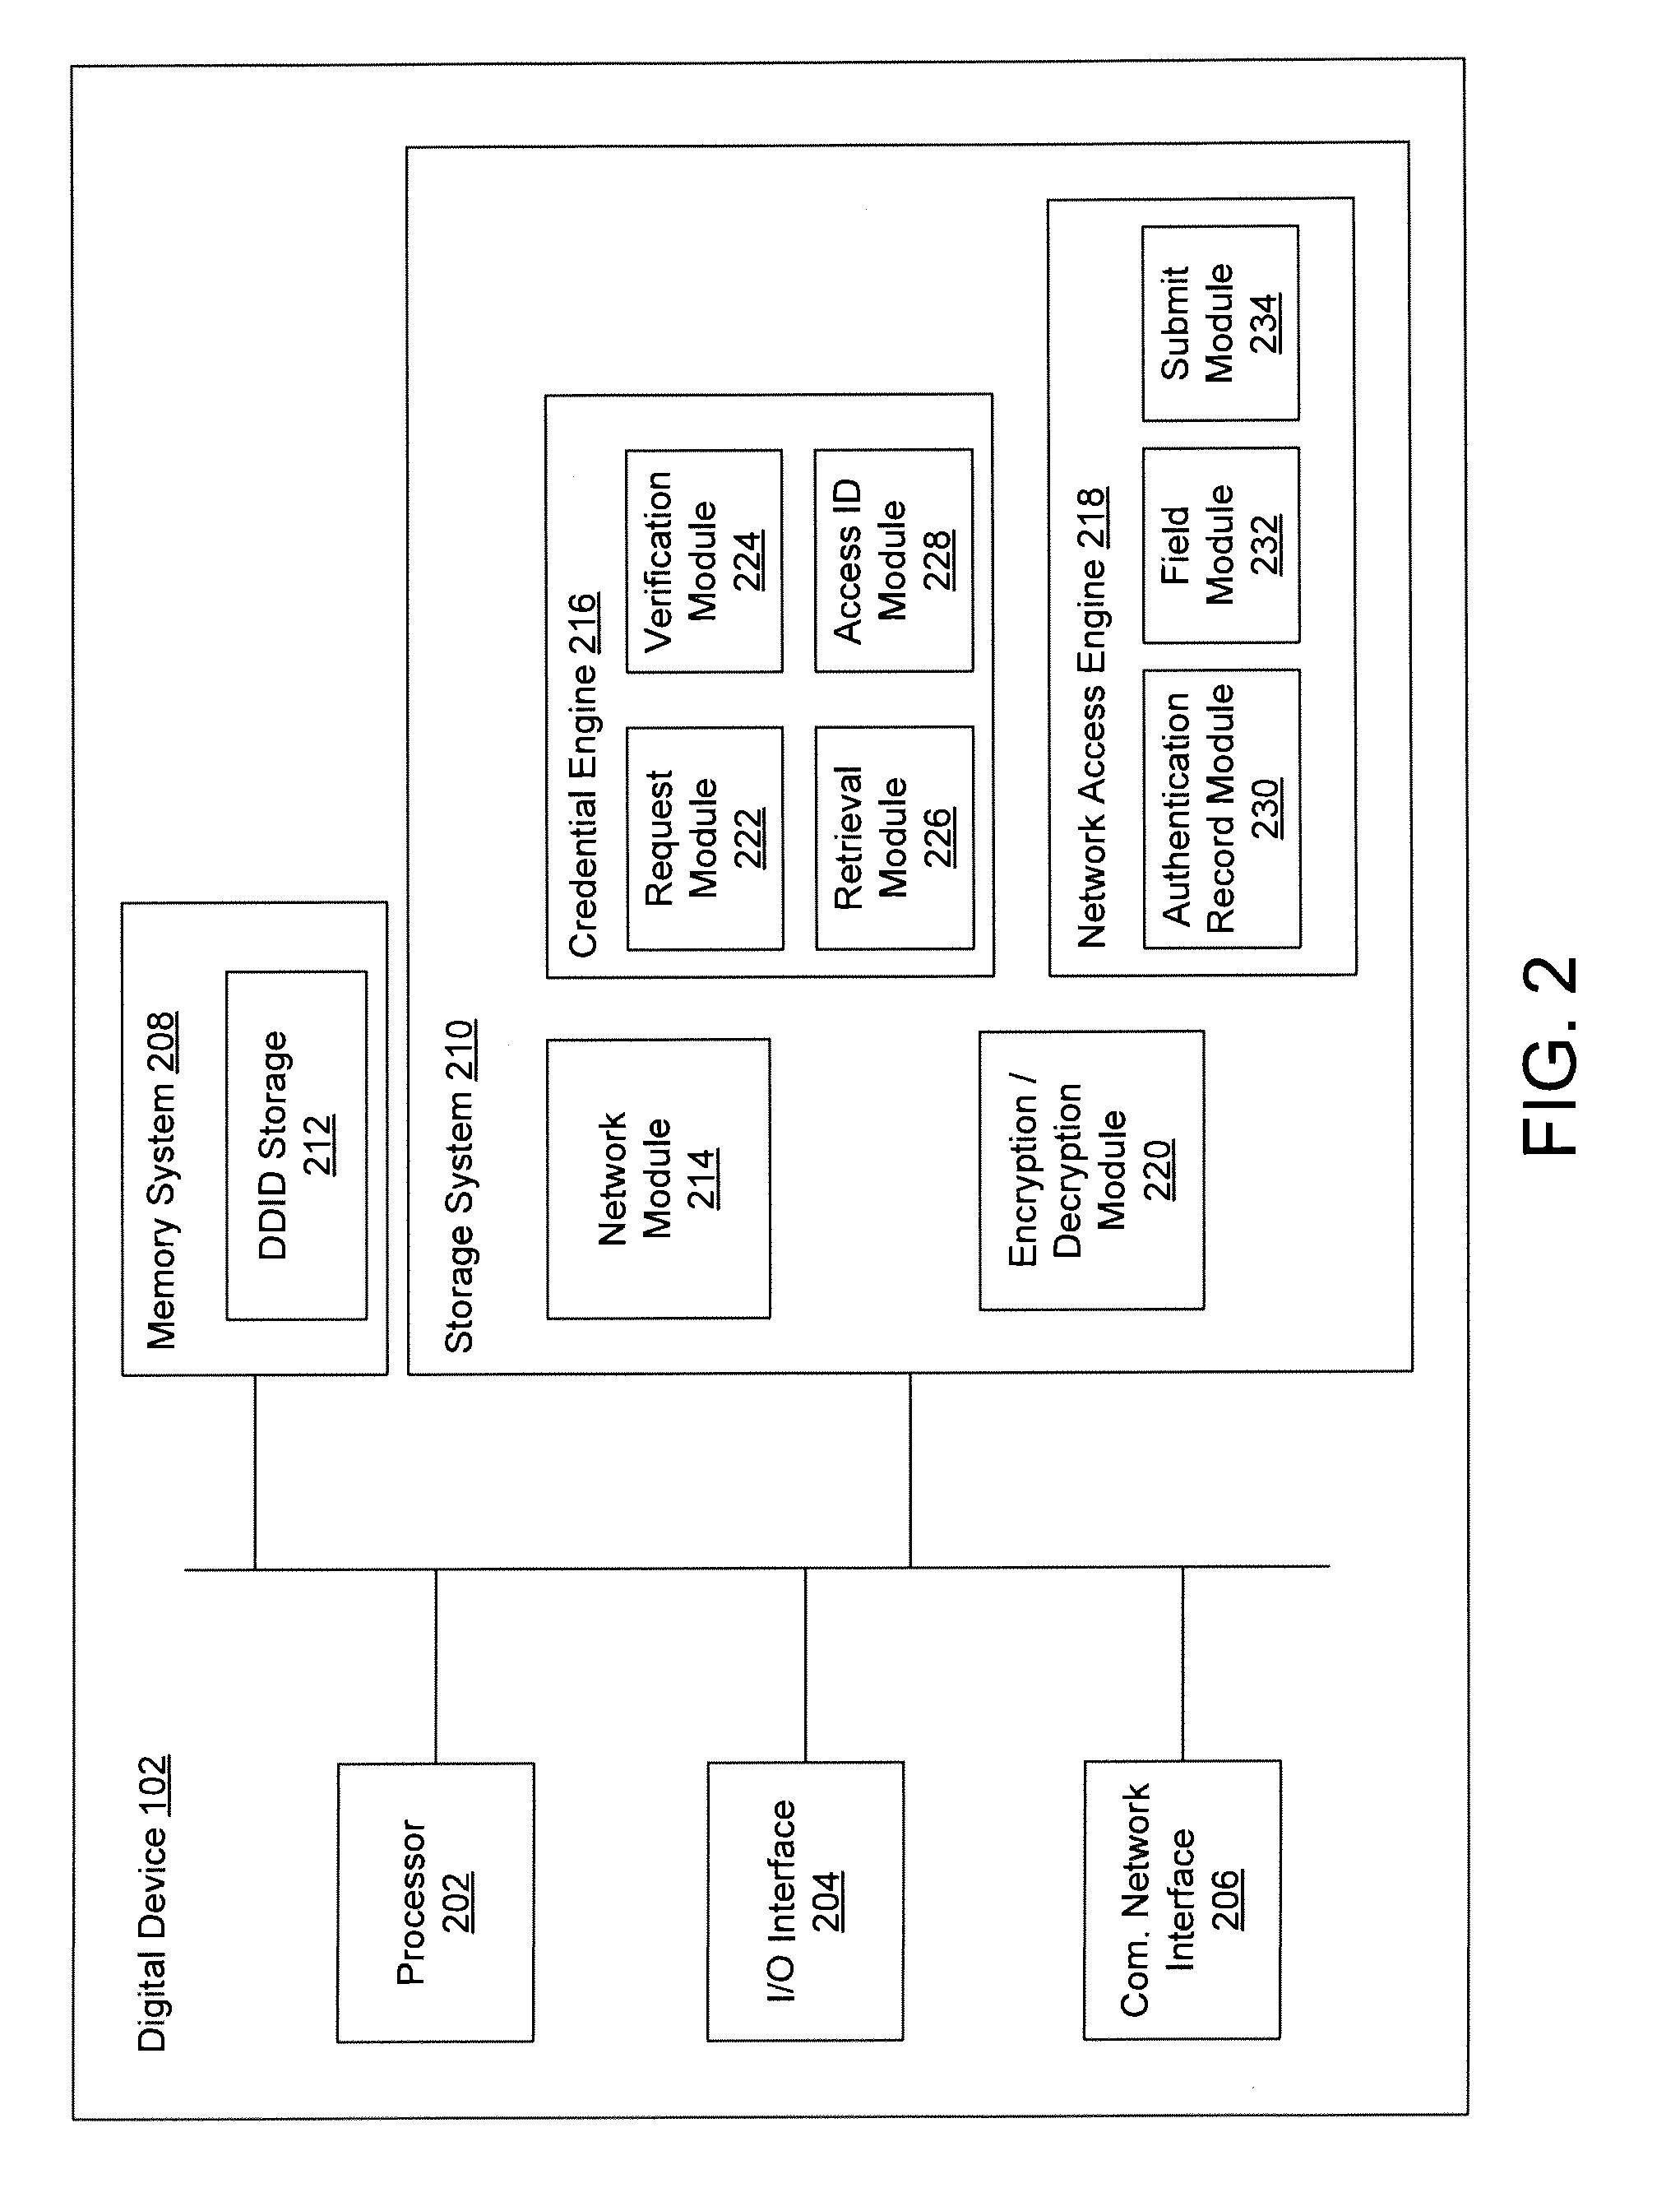 Systems and Methods for Identifying a Network